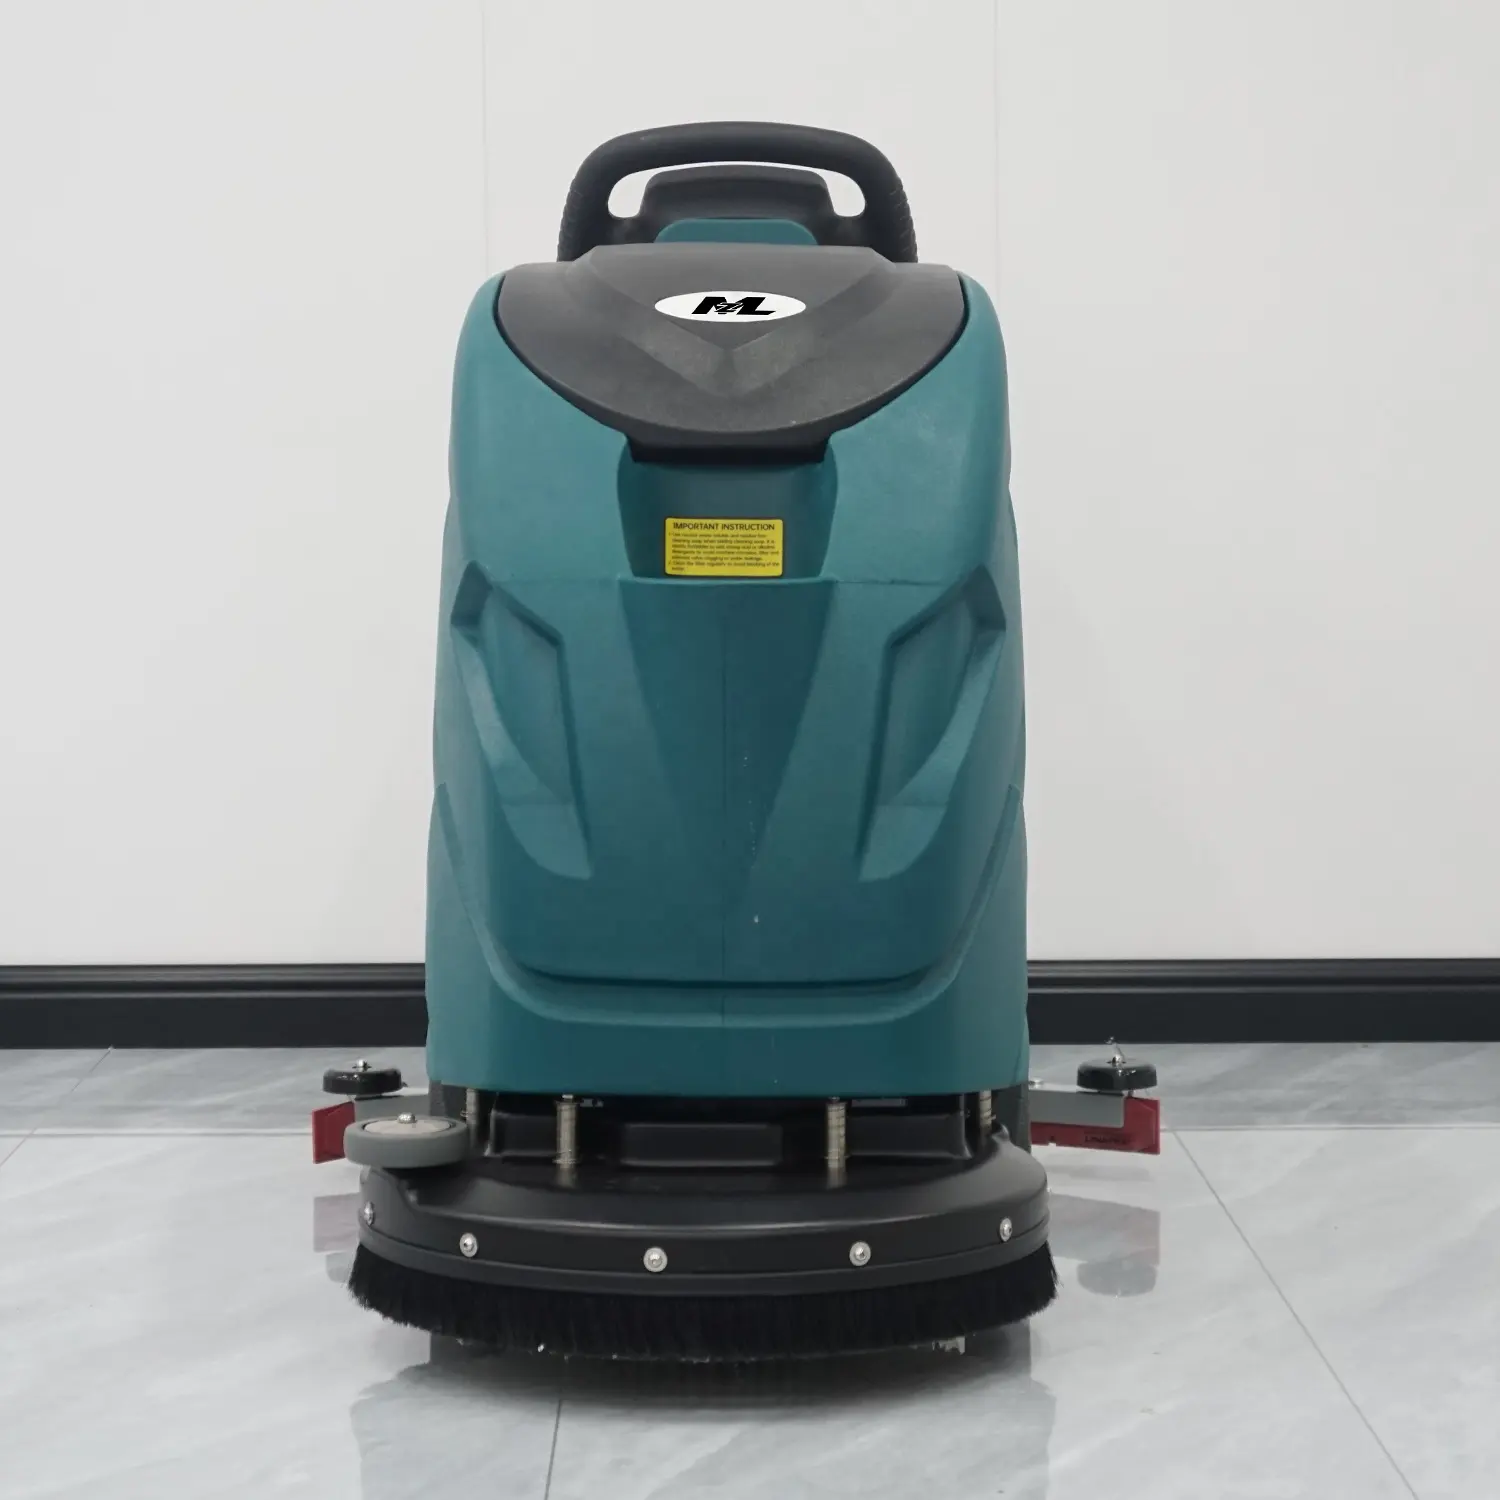 Best quality hand push walk behind floor cleaning machine professional industrial commercial floor scrubber